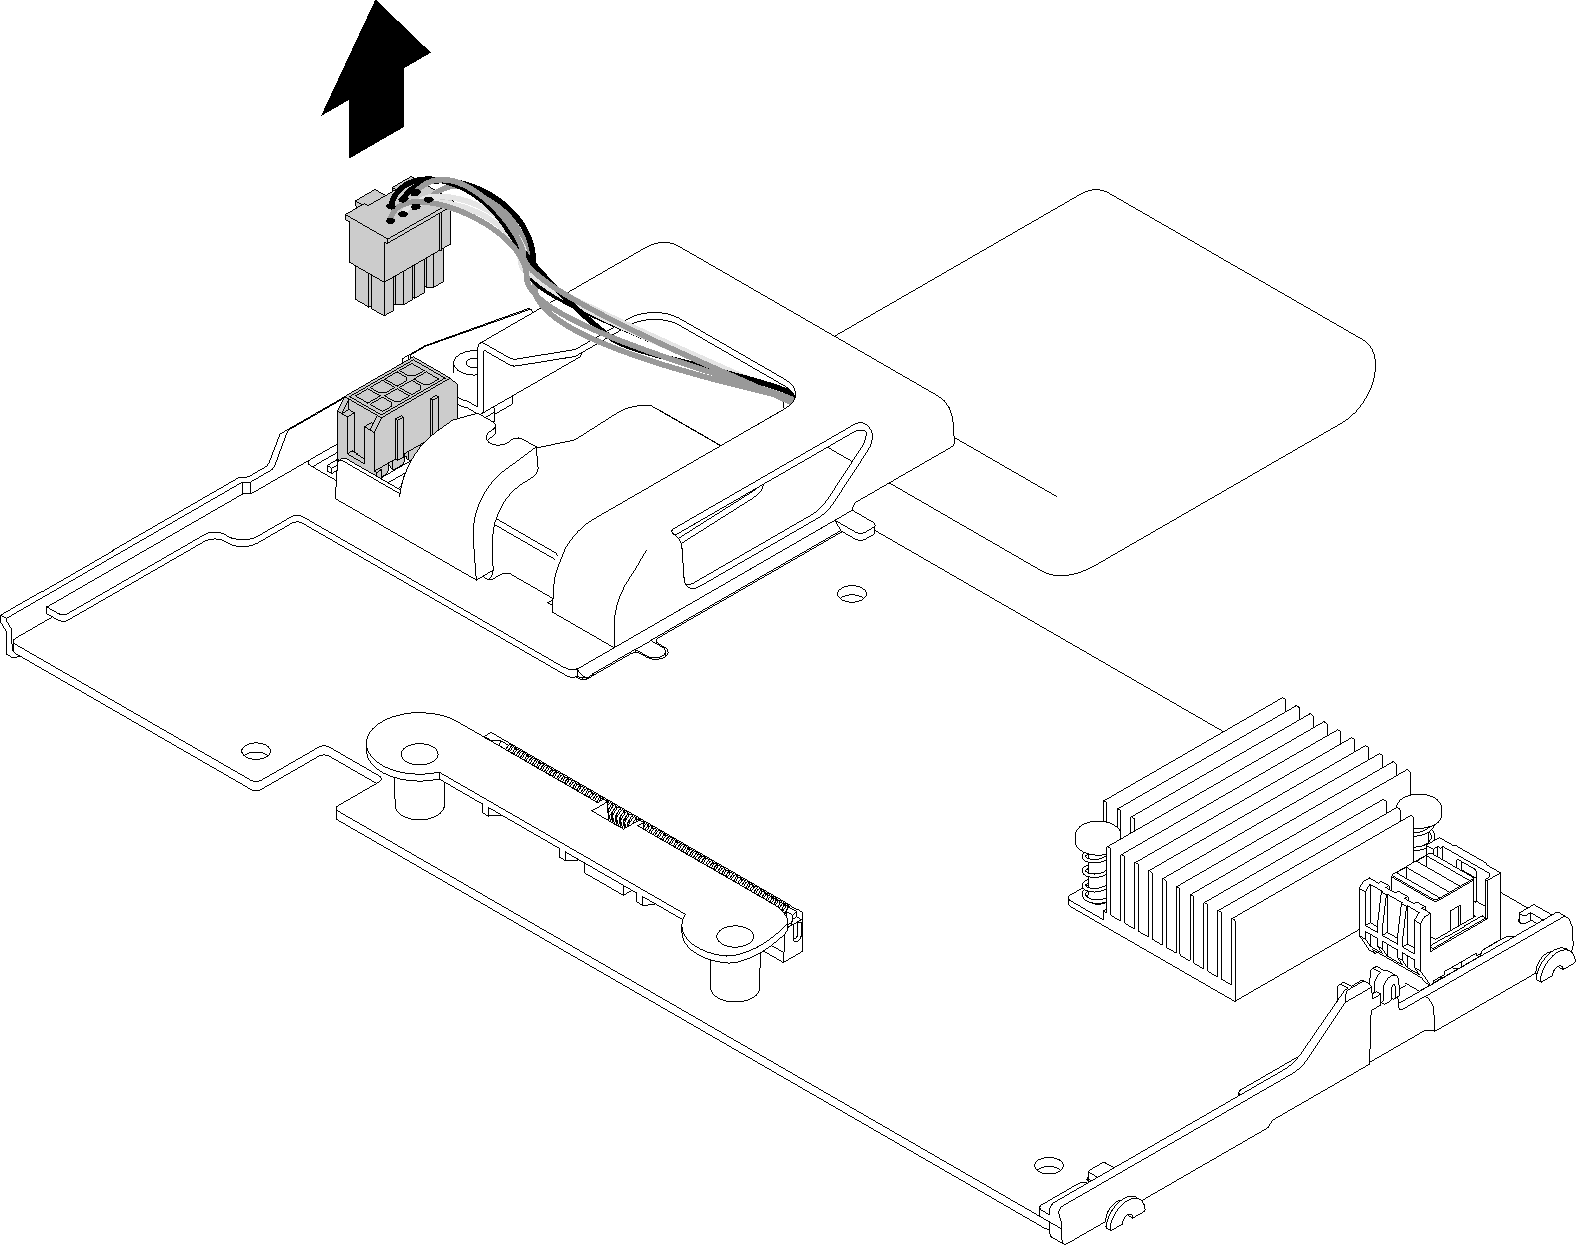 Graphic illustrating flash power module removal.